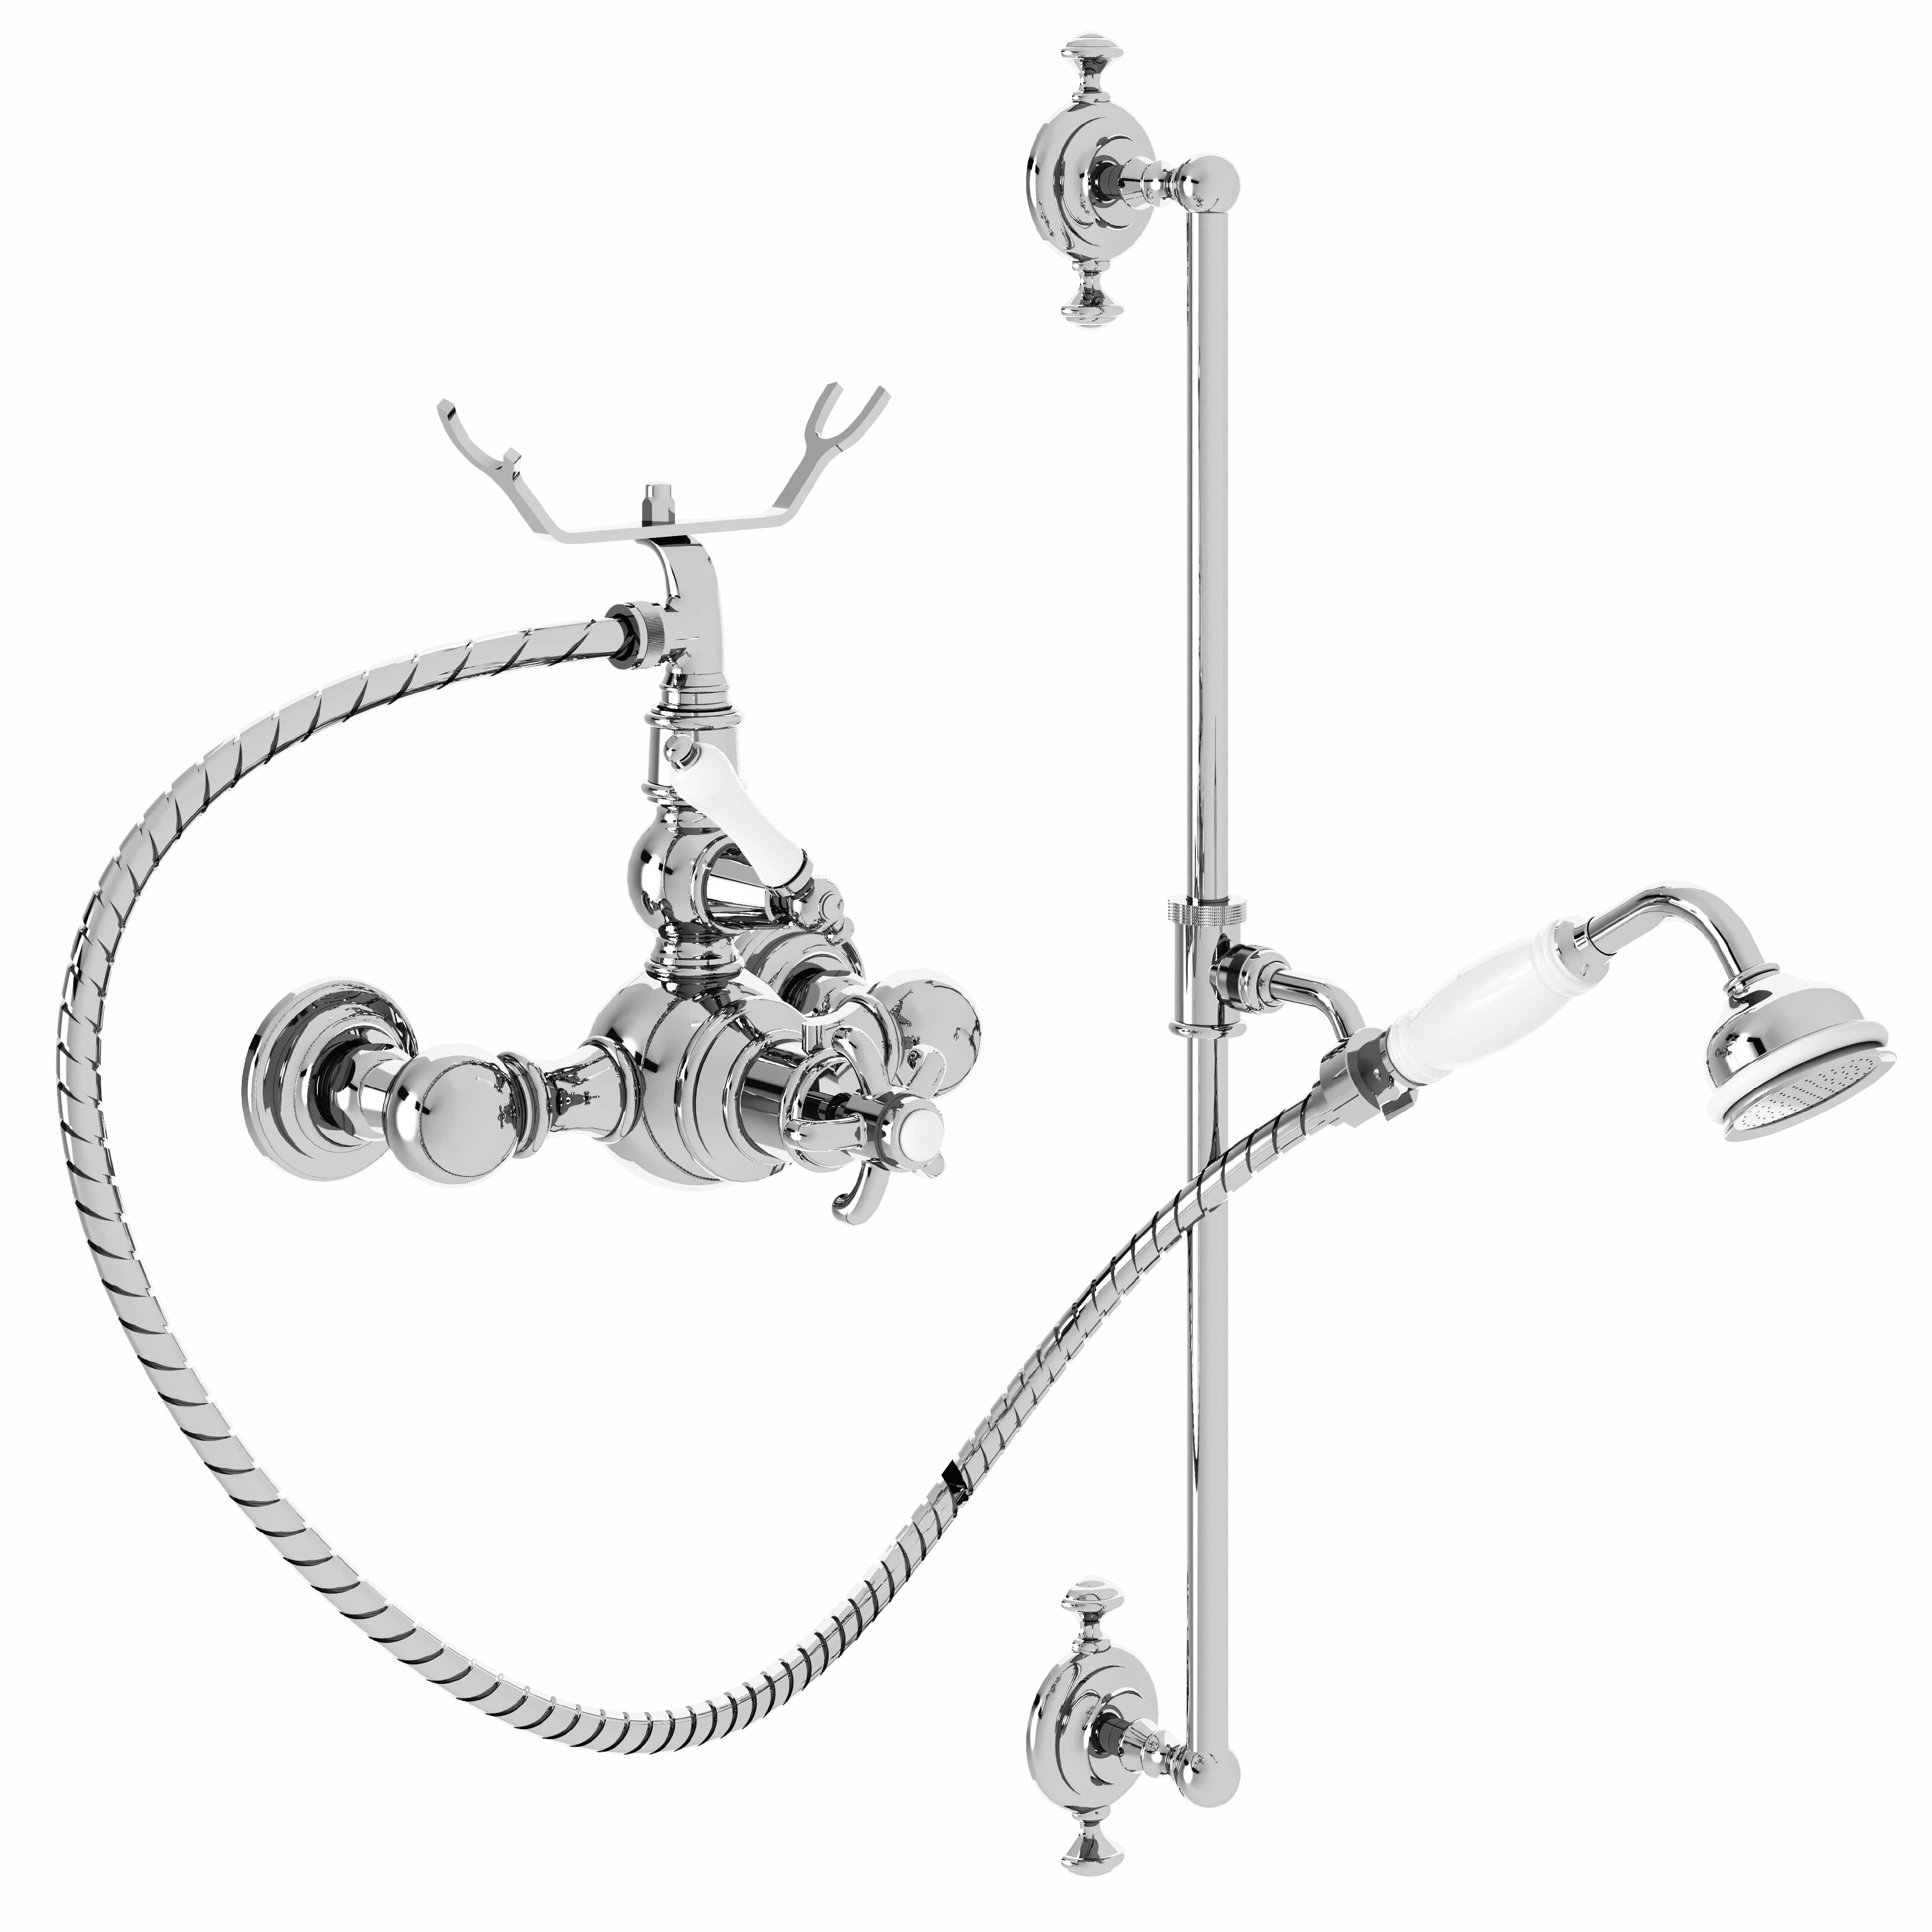 M01-2202T Thermo. shower mixer with sliding bar